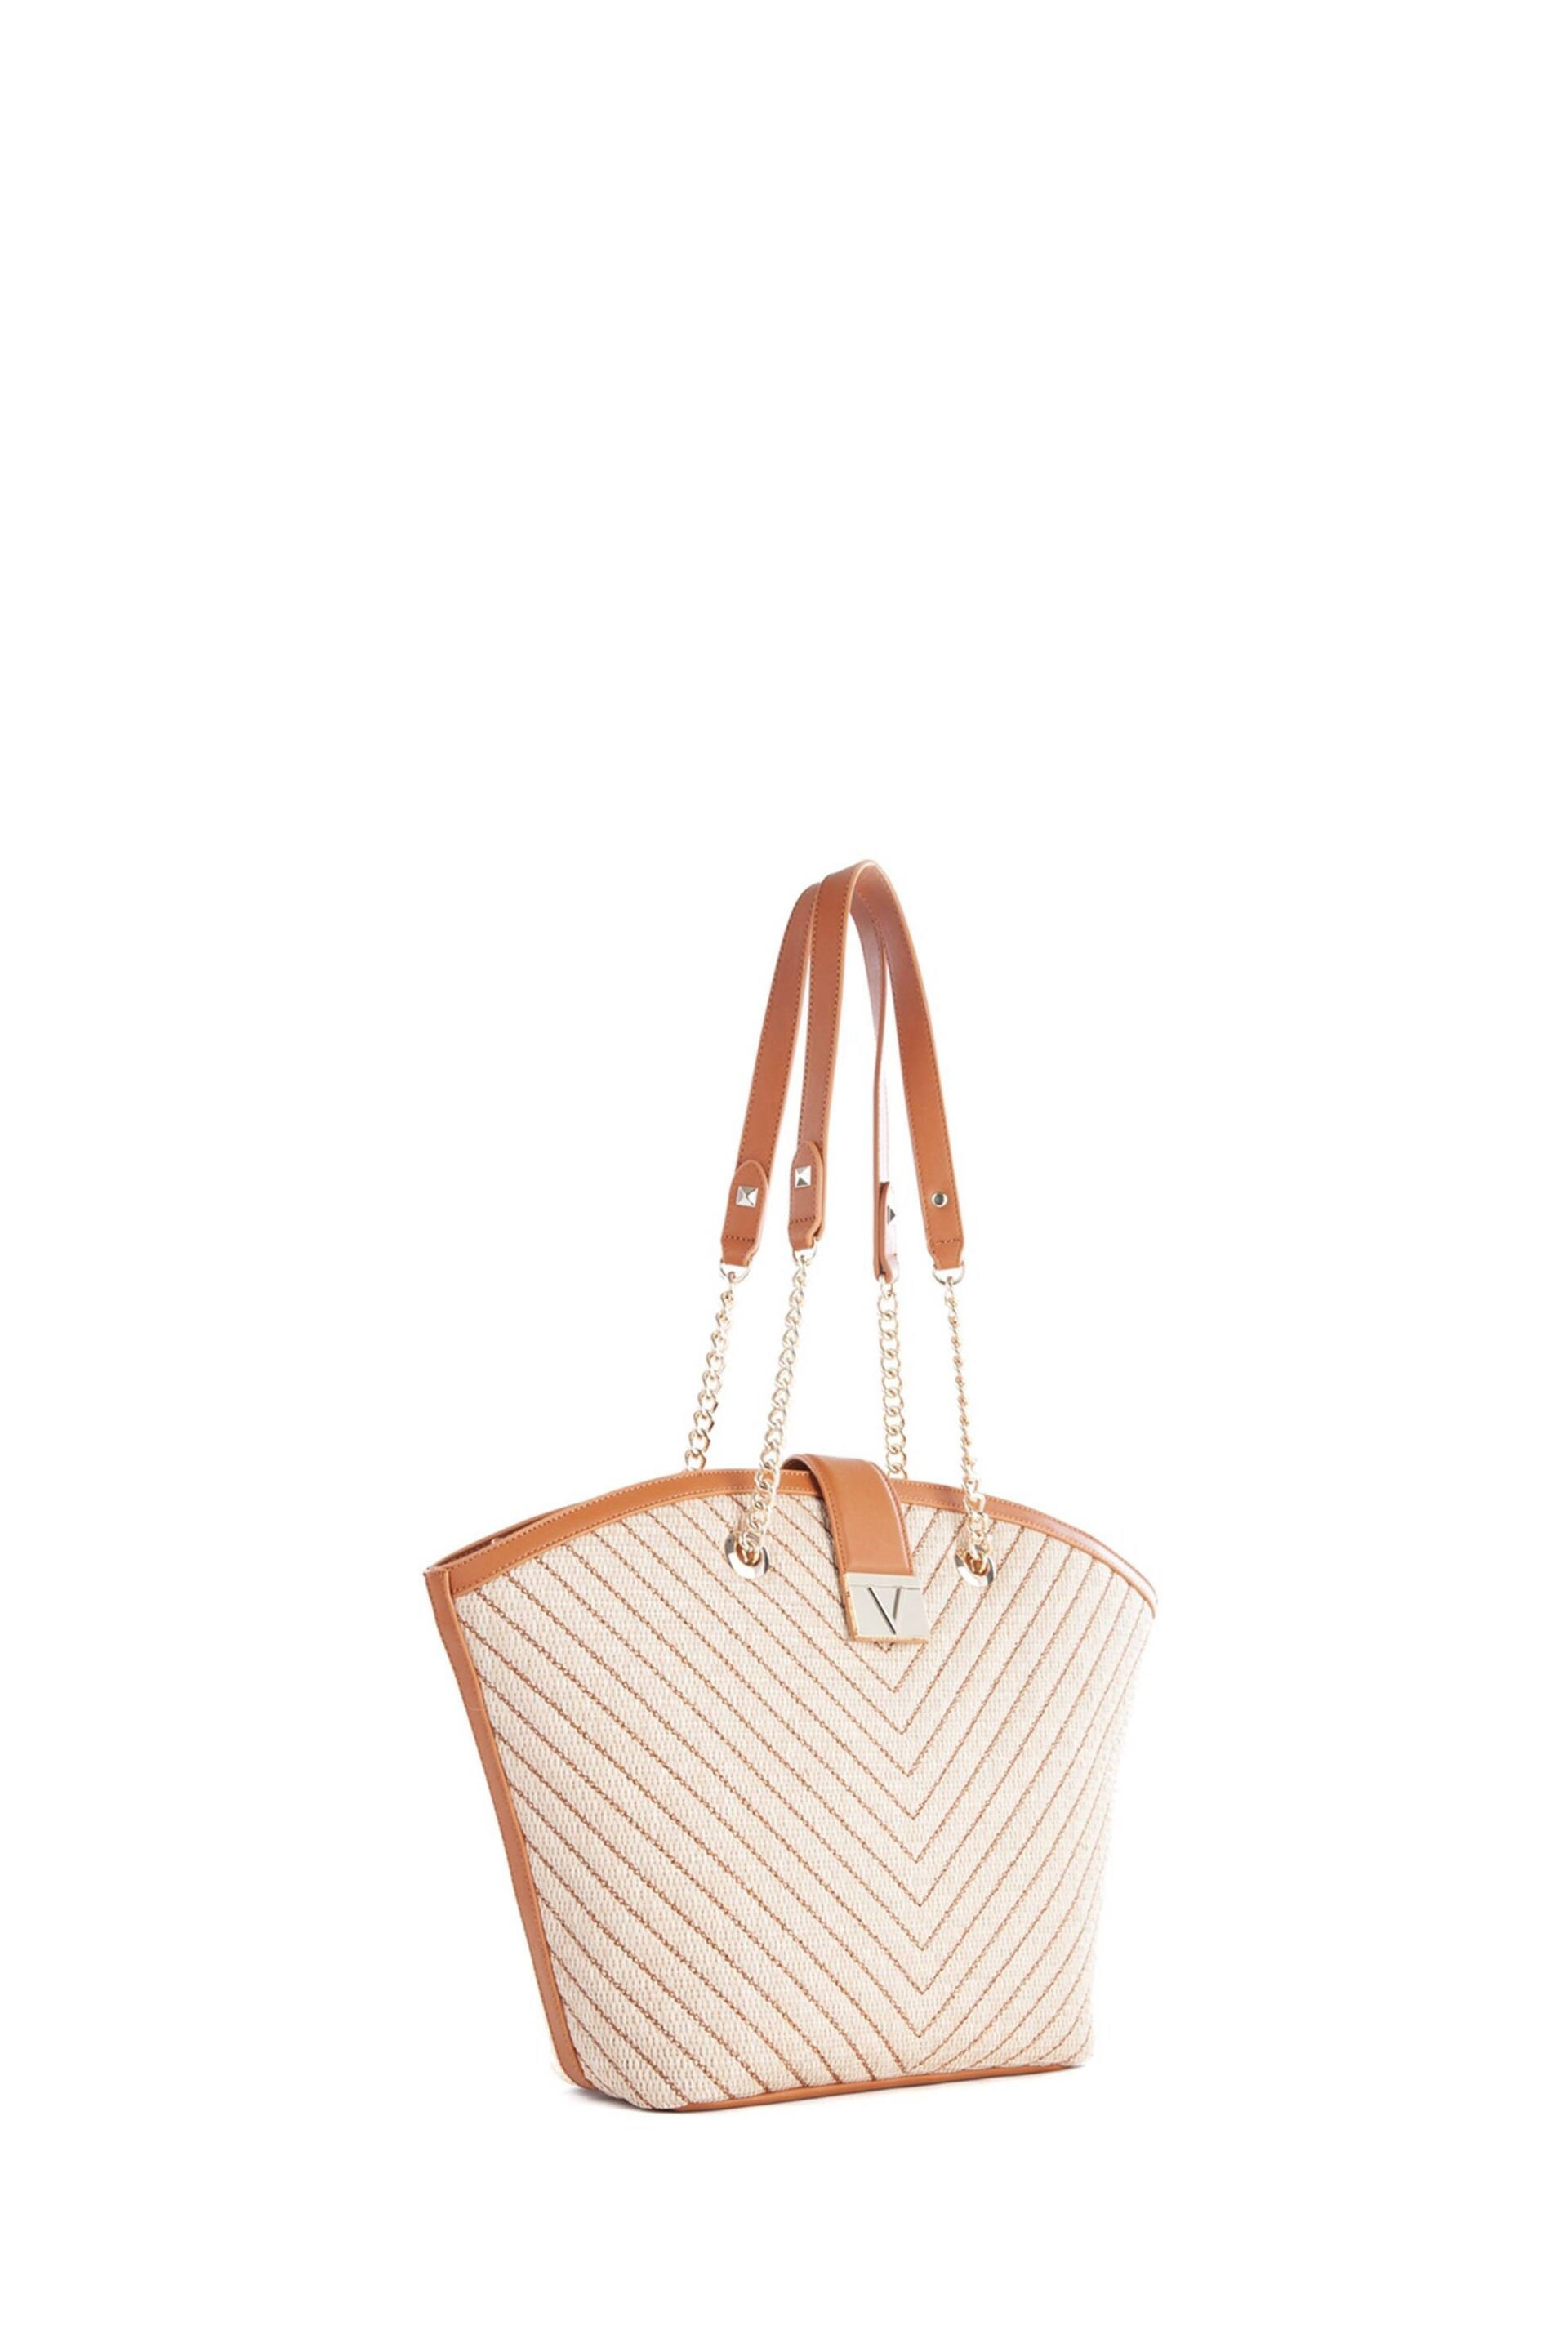 Valentino Bags Brown Tribeca Straw Tote Bag - Image 2 of 4